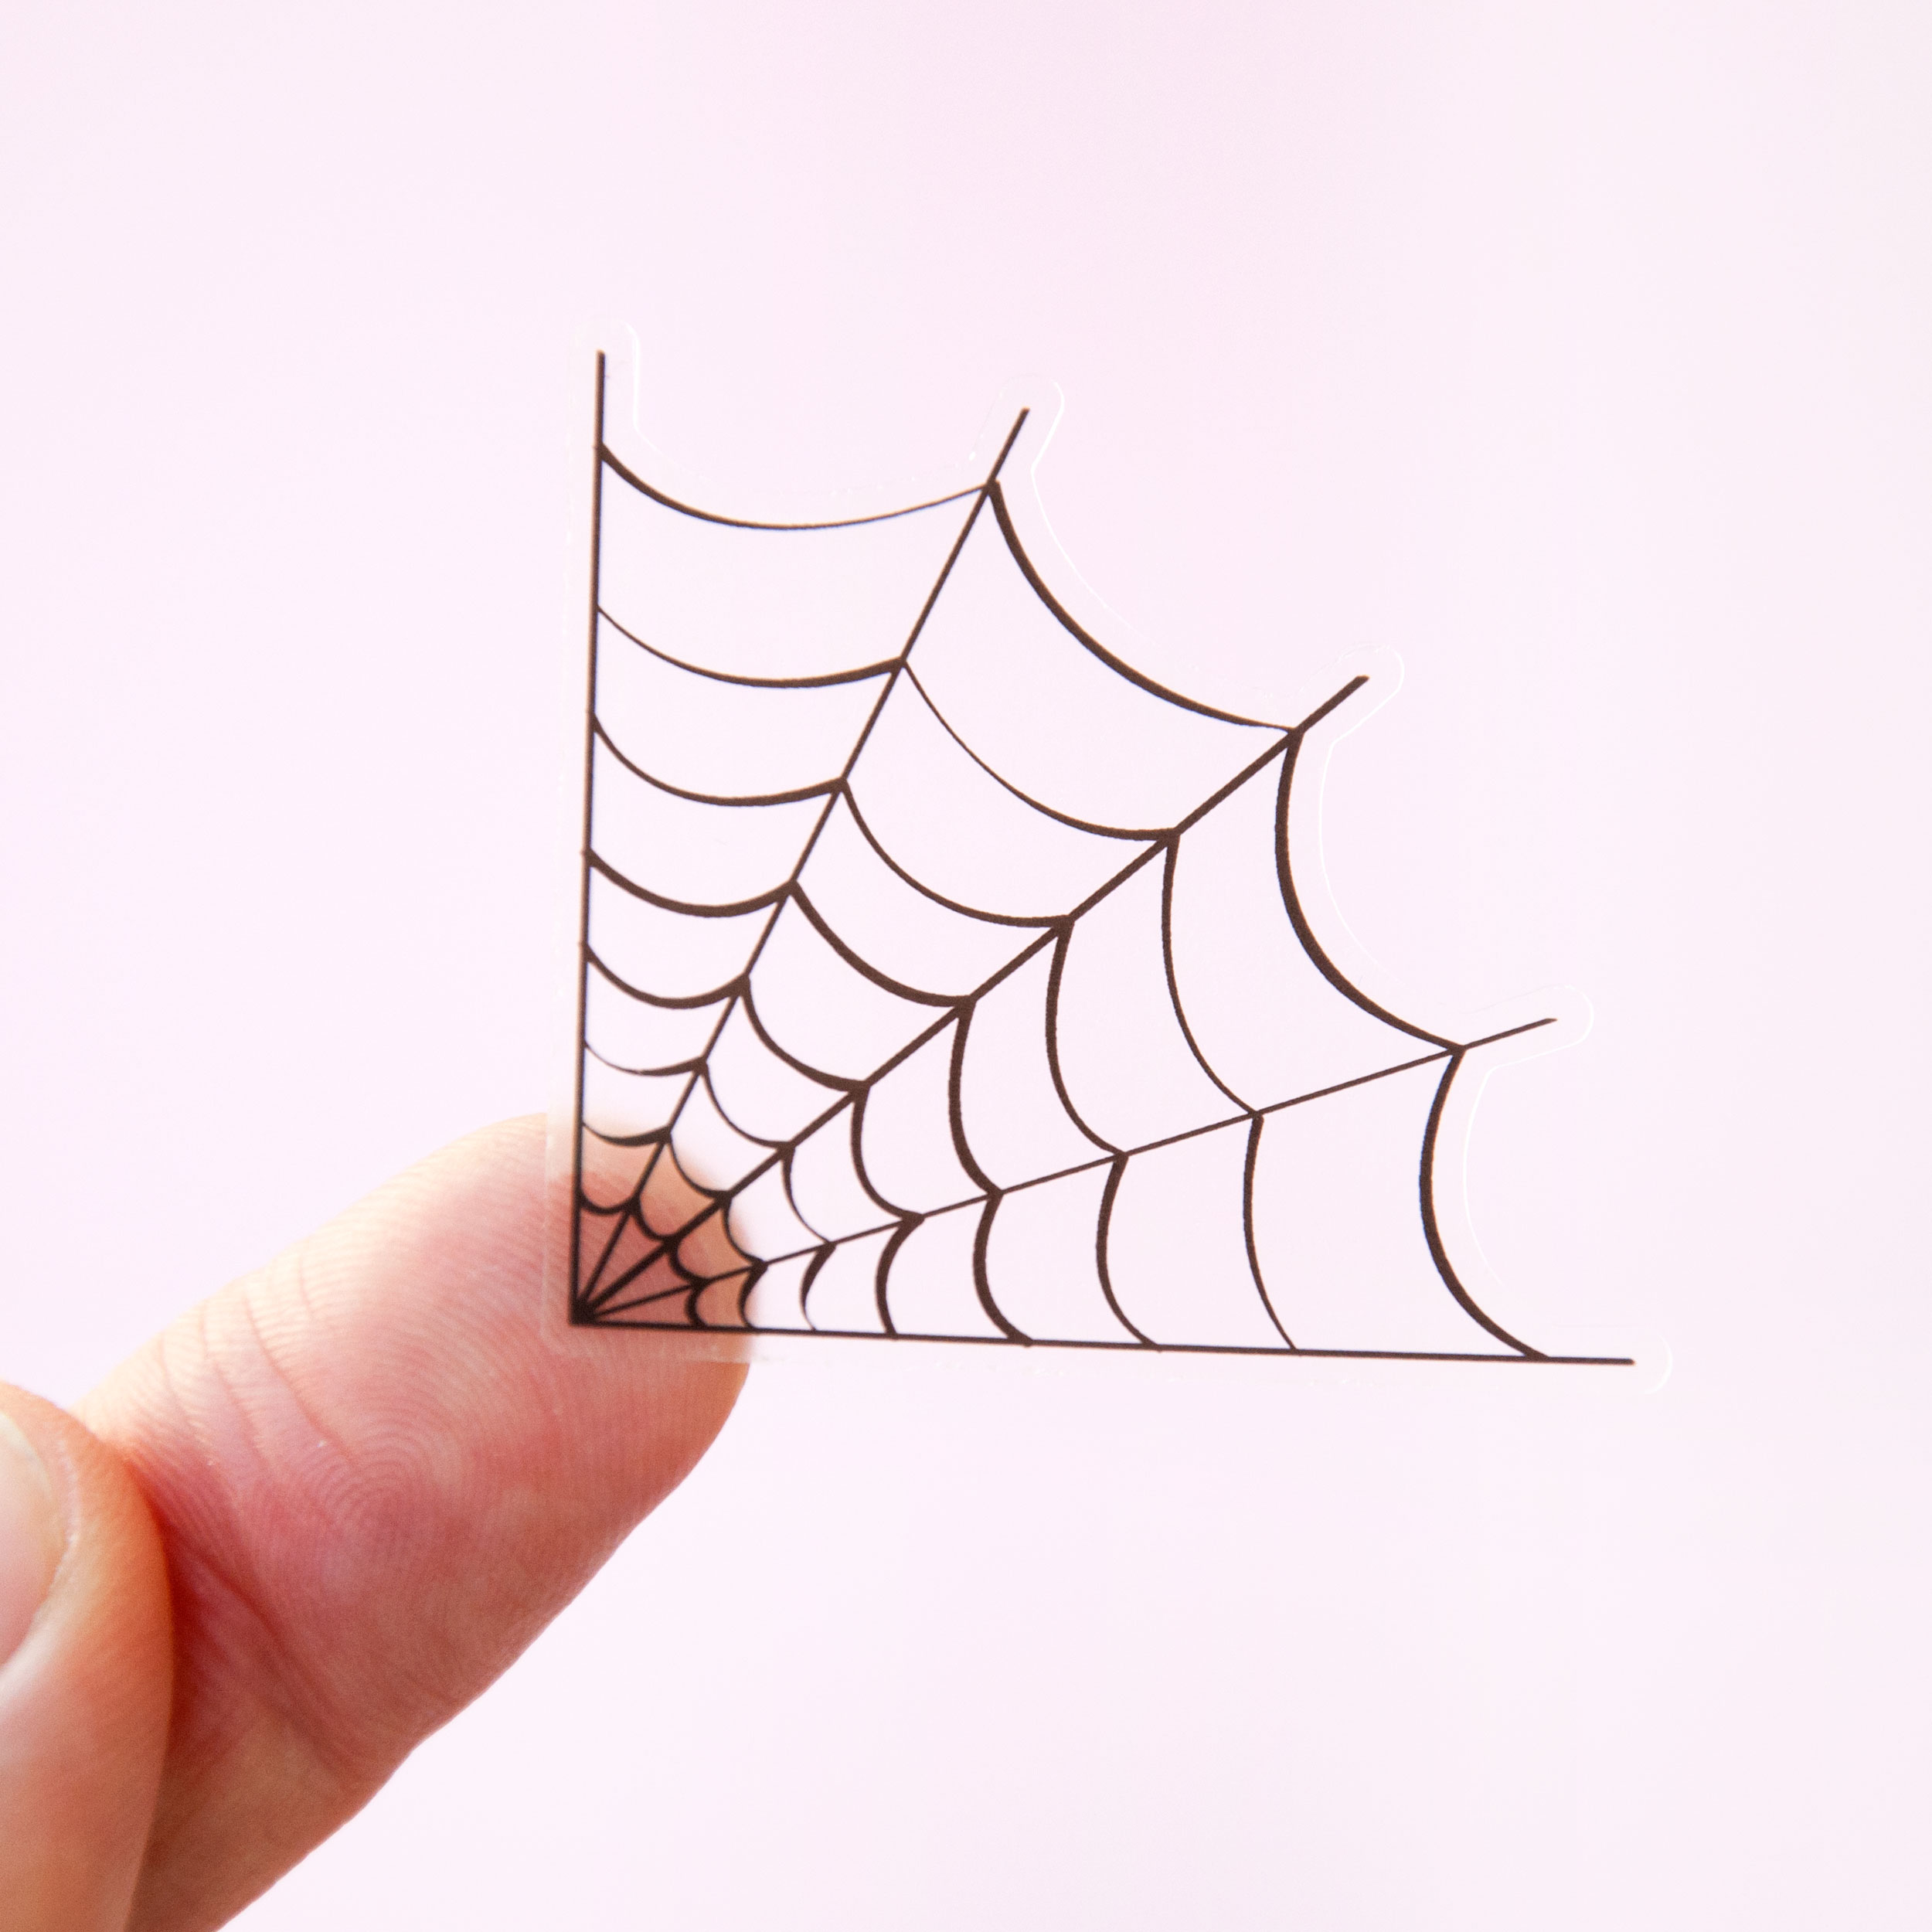 Scary Spiders and Webs Sticker Sheet - Design by Willwa